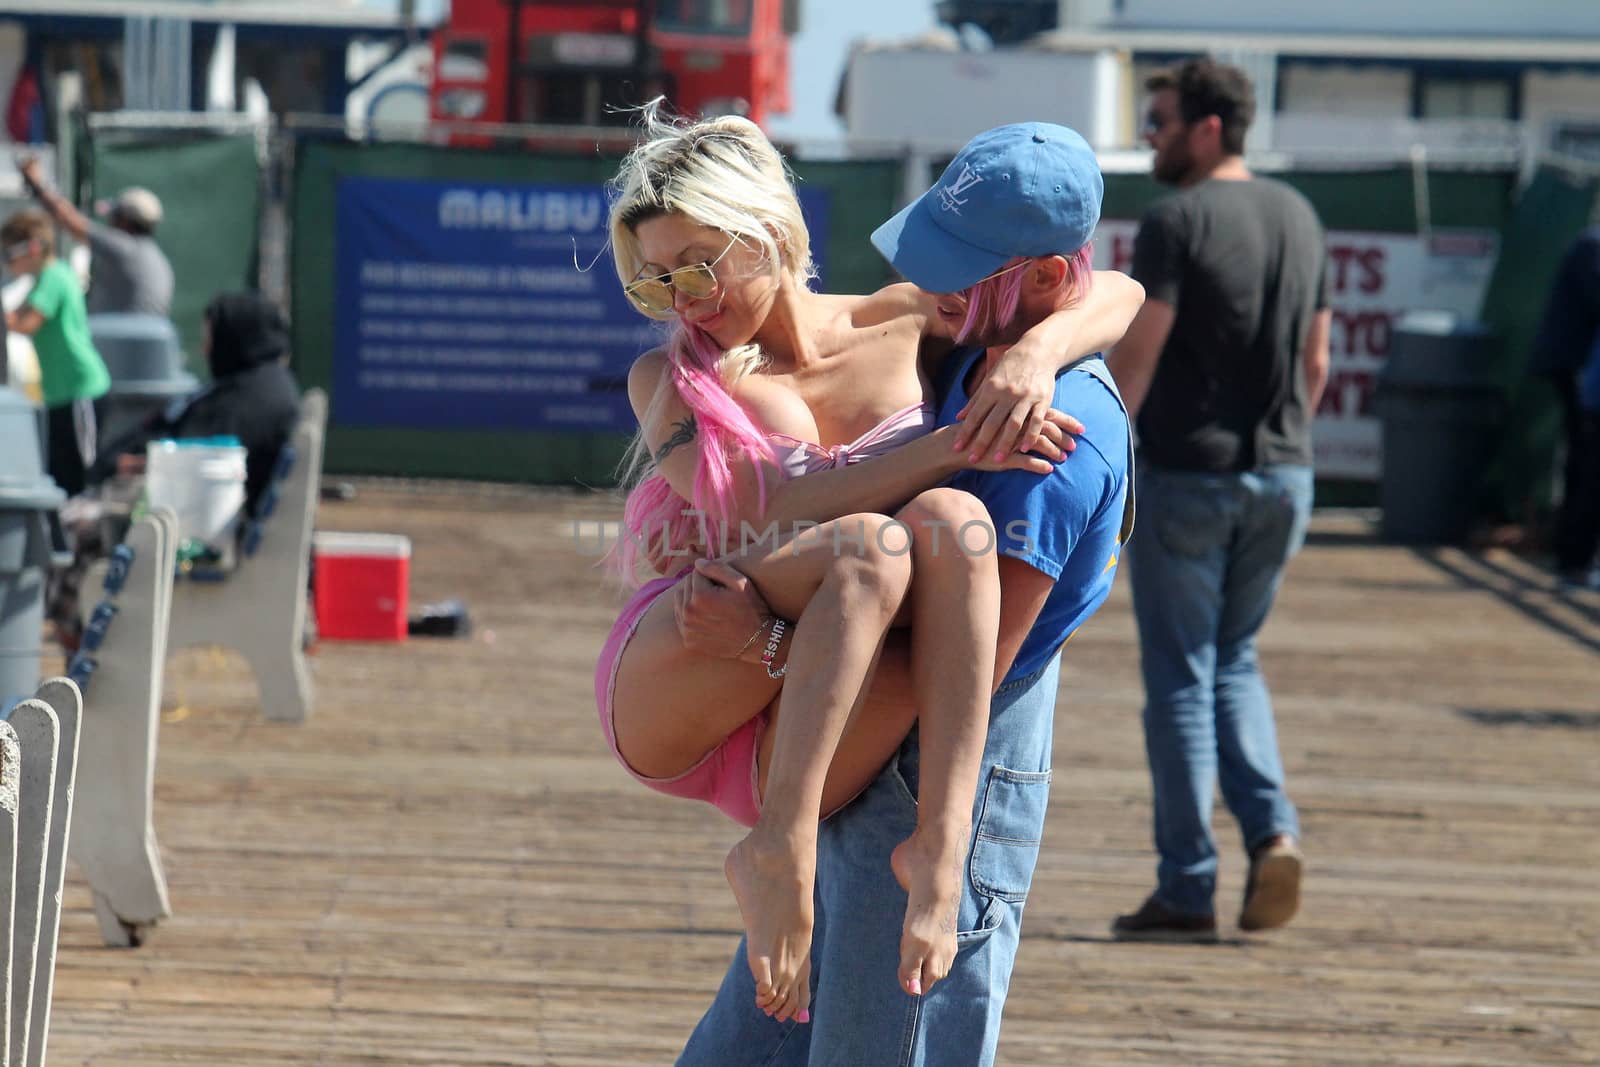 Frenchy Morgan, Jesse Willesee the "Celebrity Big Brother" Star and ex-lebian girlfriend of Gabi Grecko is spotted getting romantic with Australian Musician Jesse Willesee at the Malibu Pier, Malibu, CA 05-15-17